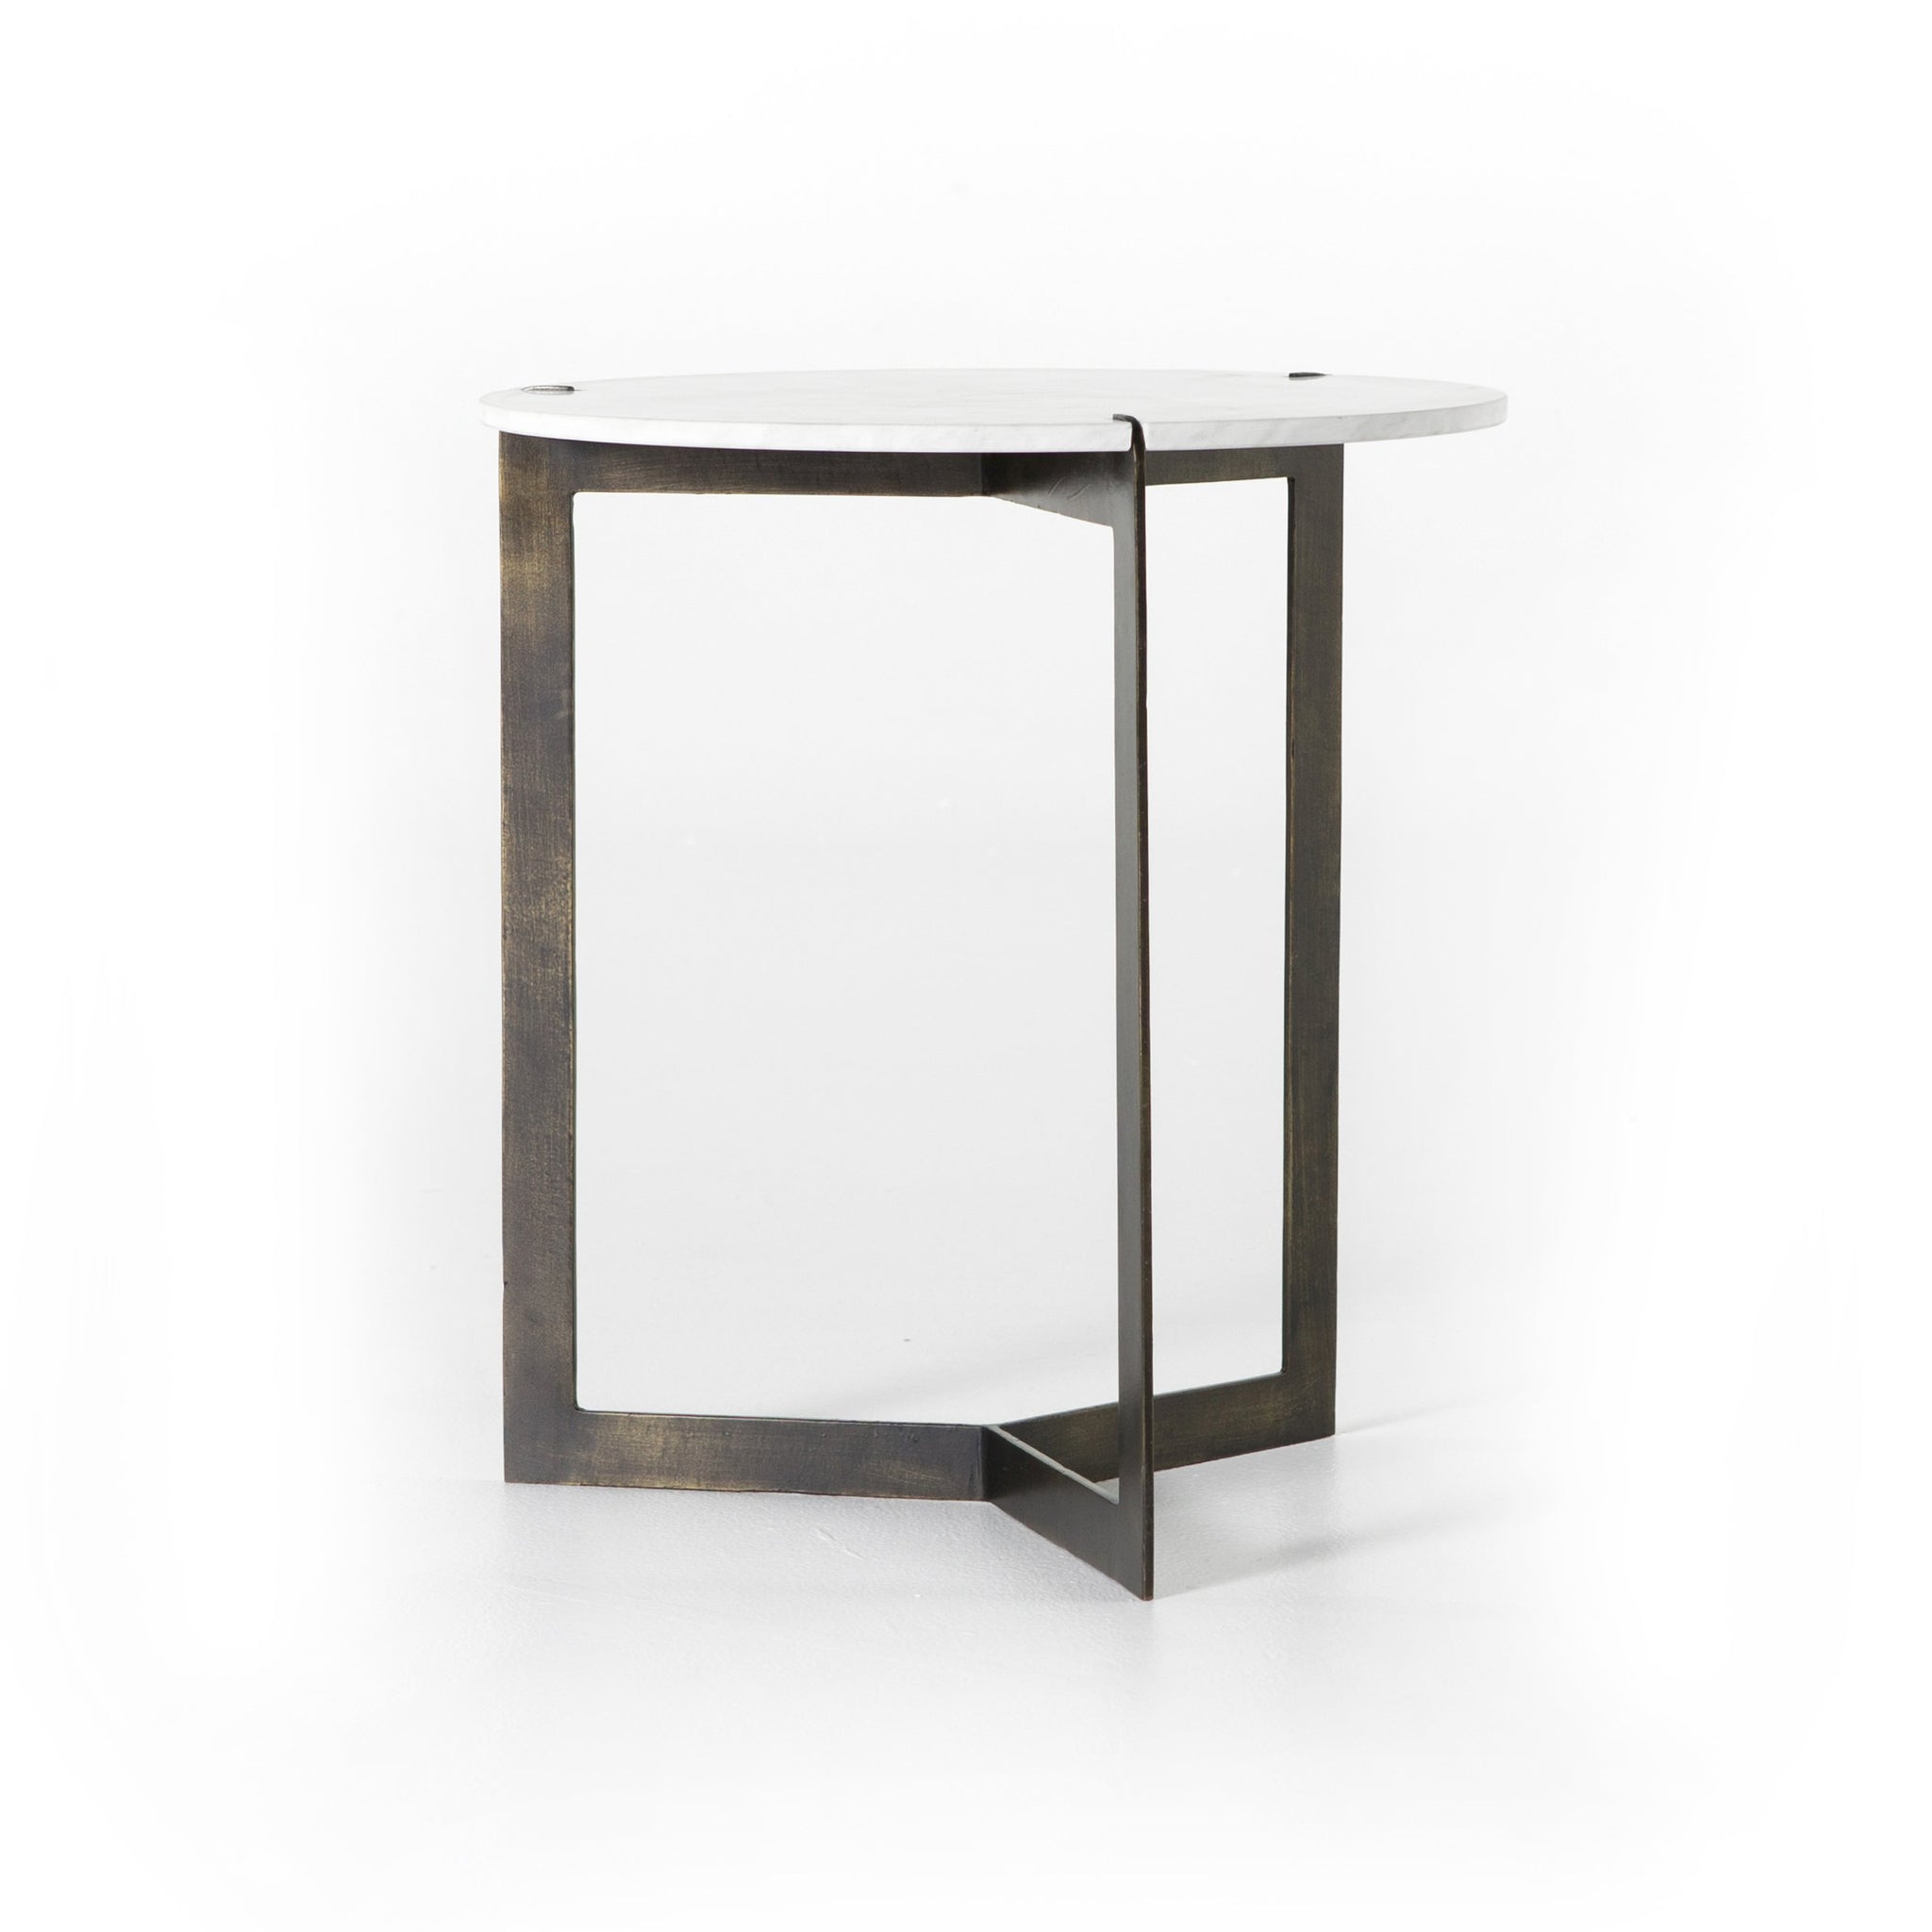 KEVA END TABLE,  Hammered Brass, Polished White Marble - Rustic Edge